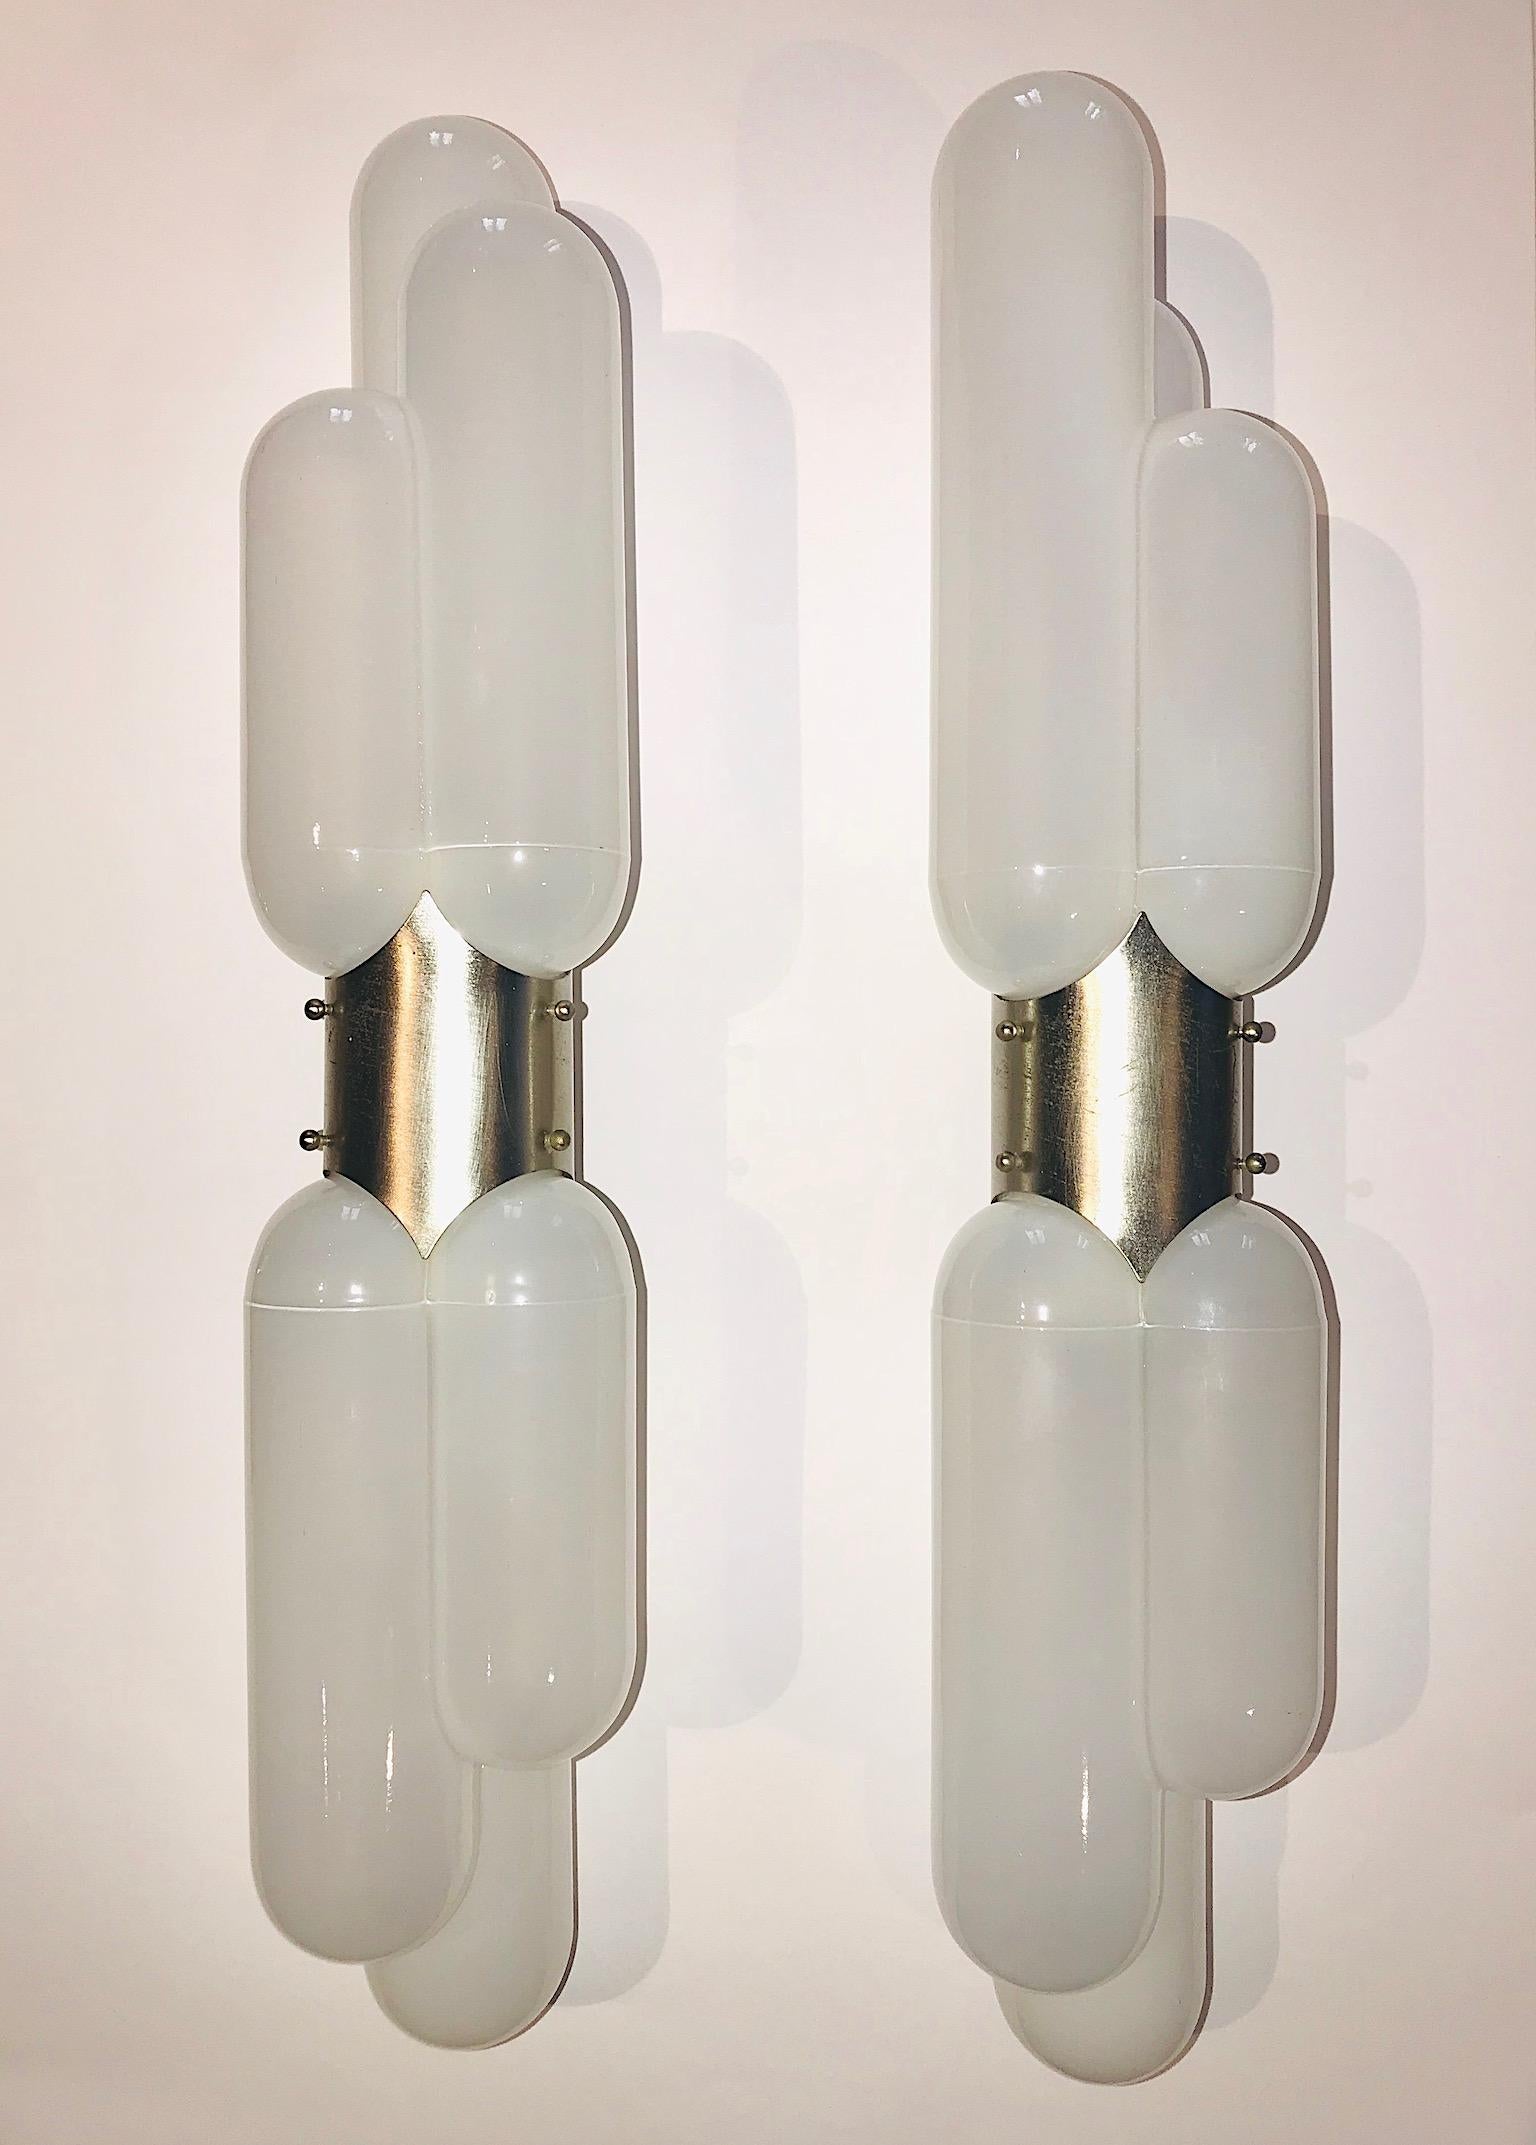 A wonderful pair of Italian Mid-Century Modern torpedo shape wall sconces by Carlo Nason for Mazzega, circa 1970. Milky white opaque mold blown shades are suspended on top and bottom of satin finish metal wall mounts. Each sconce has two lights and